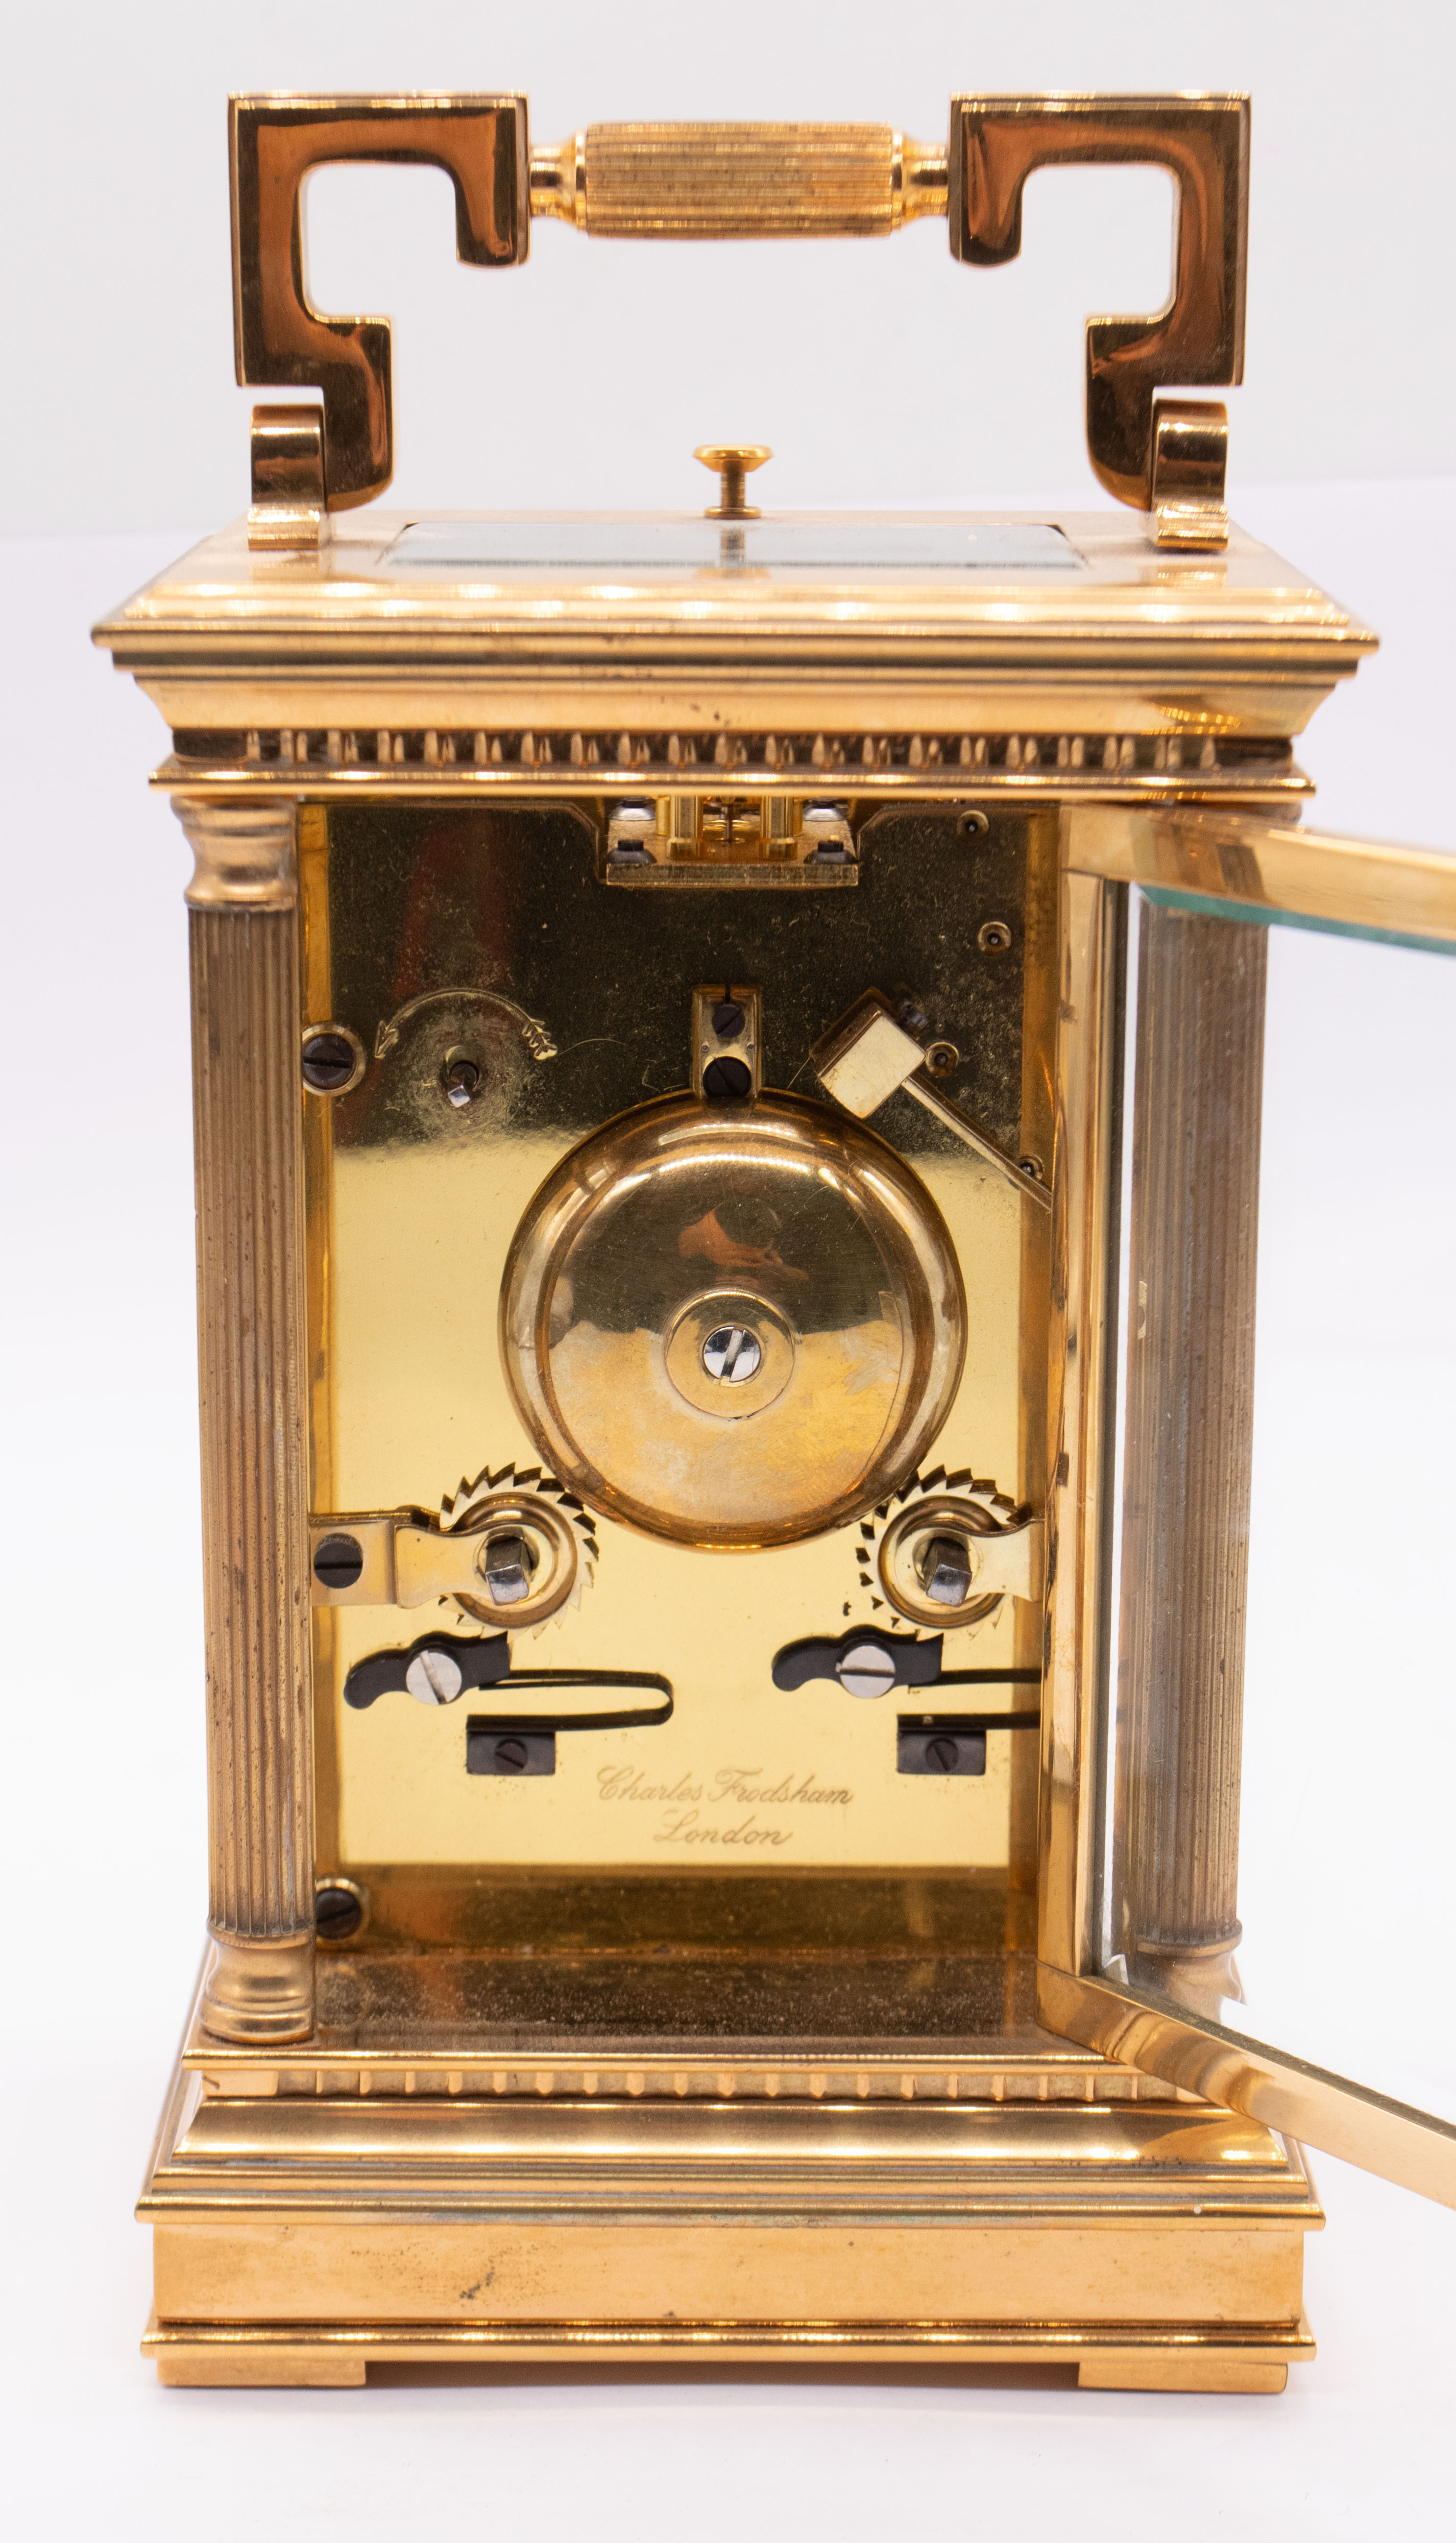 Charles Frodsham London repeating brass carriage clock with eight day two train spring driven - Image 4 of 6